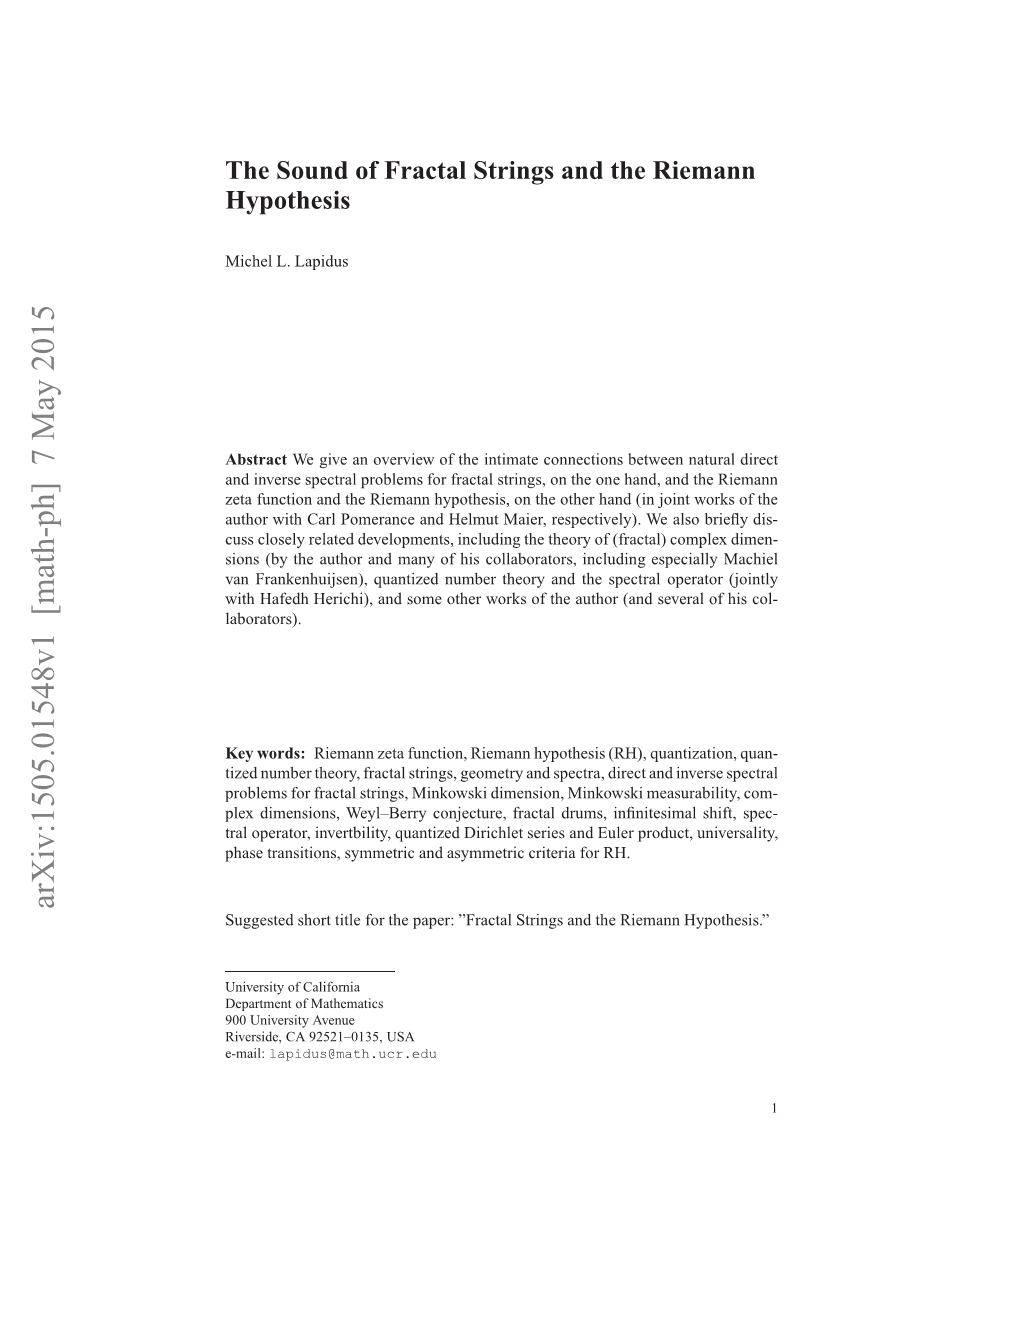 The Sound of Fractal Strings and the Riemann Hypothesis